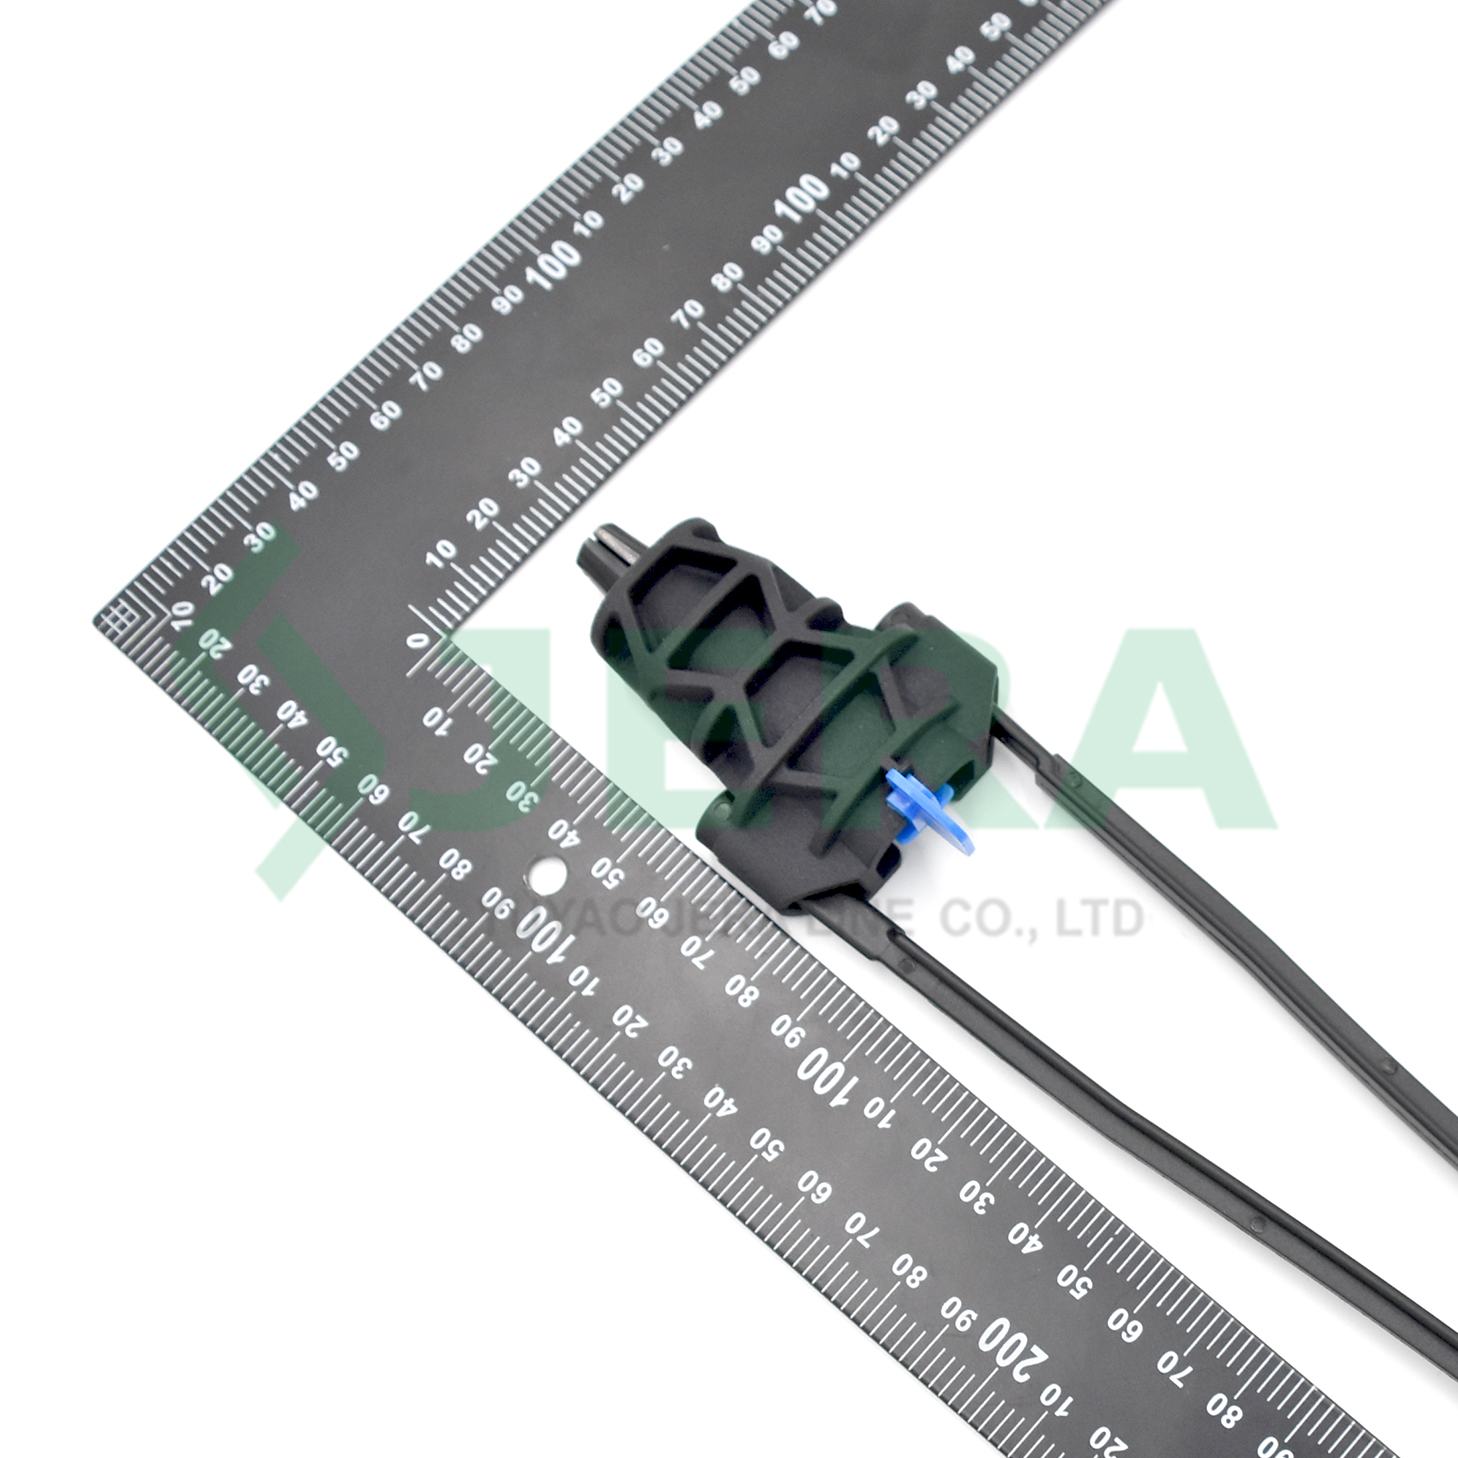 Fiber cable clamp FTTH PA-101